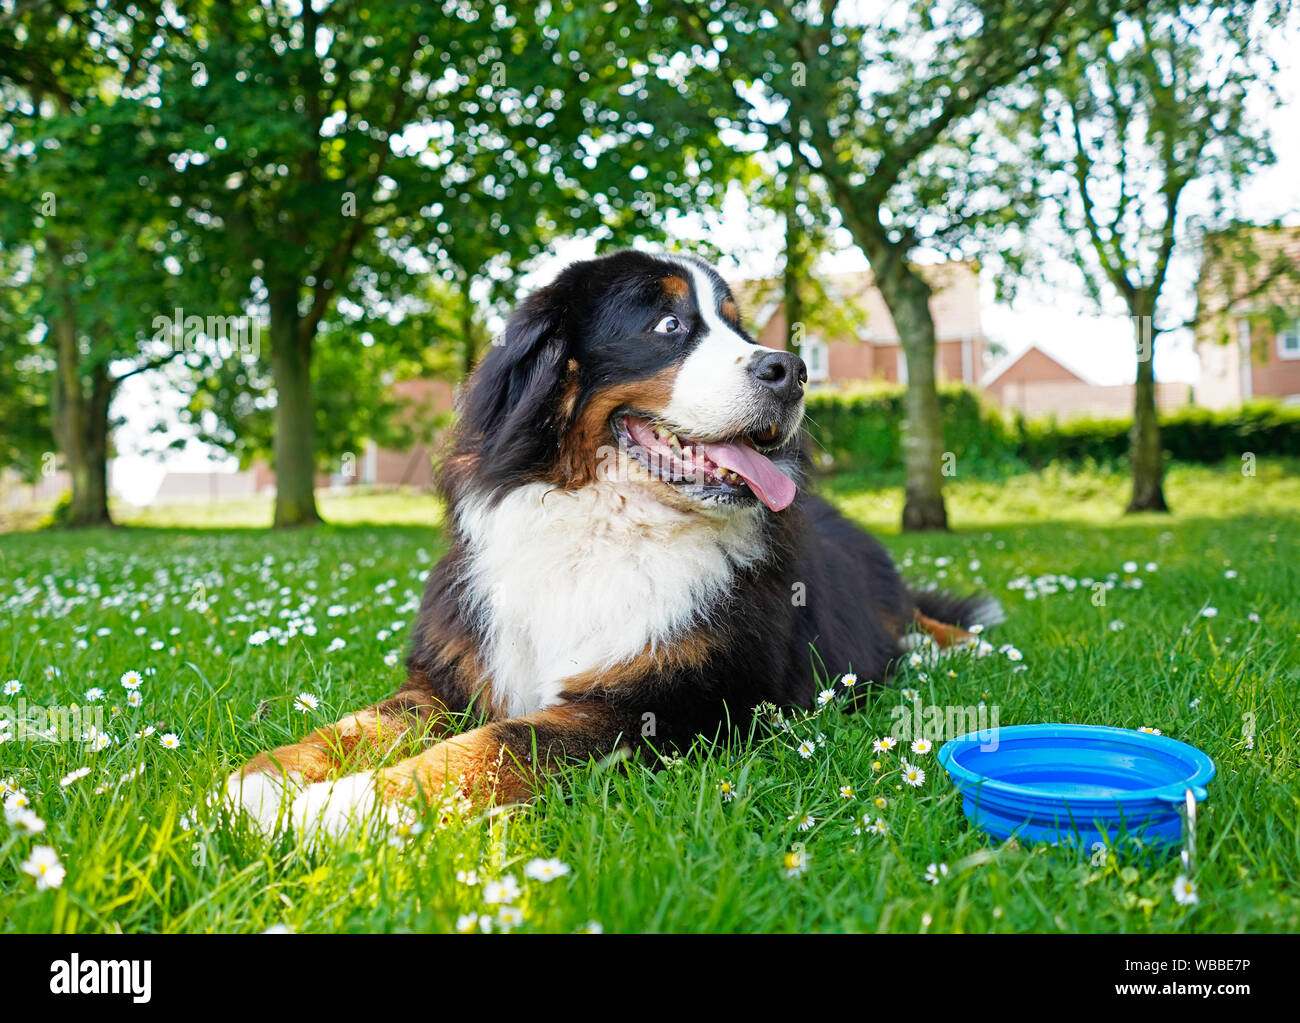 Large Bernese Mountain Dog lying on the green grass with some white flowers, blue water bowl next to him. Stock Photo